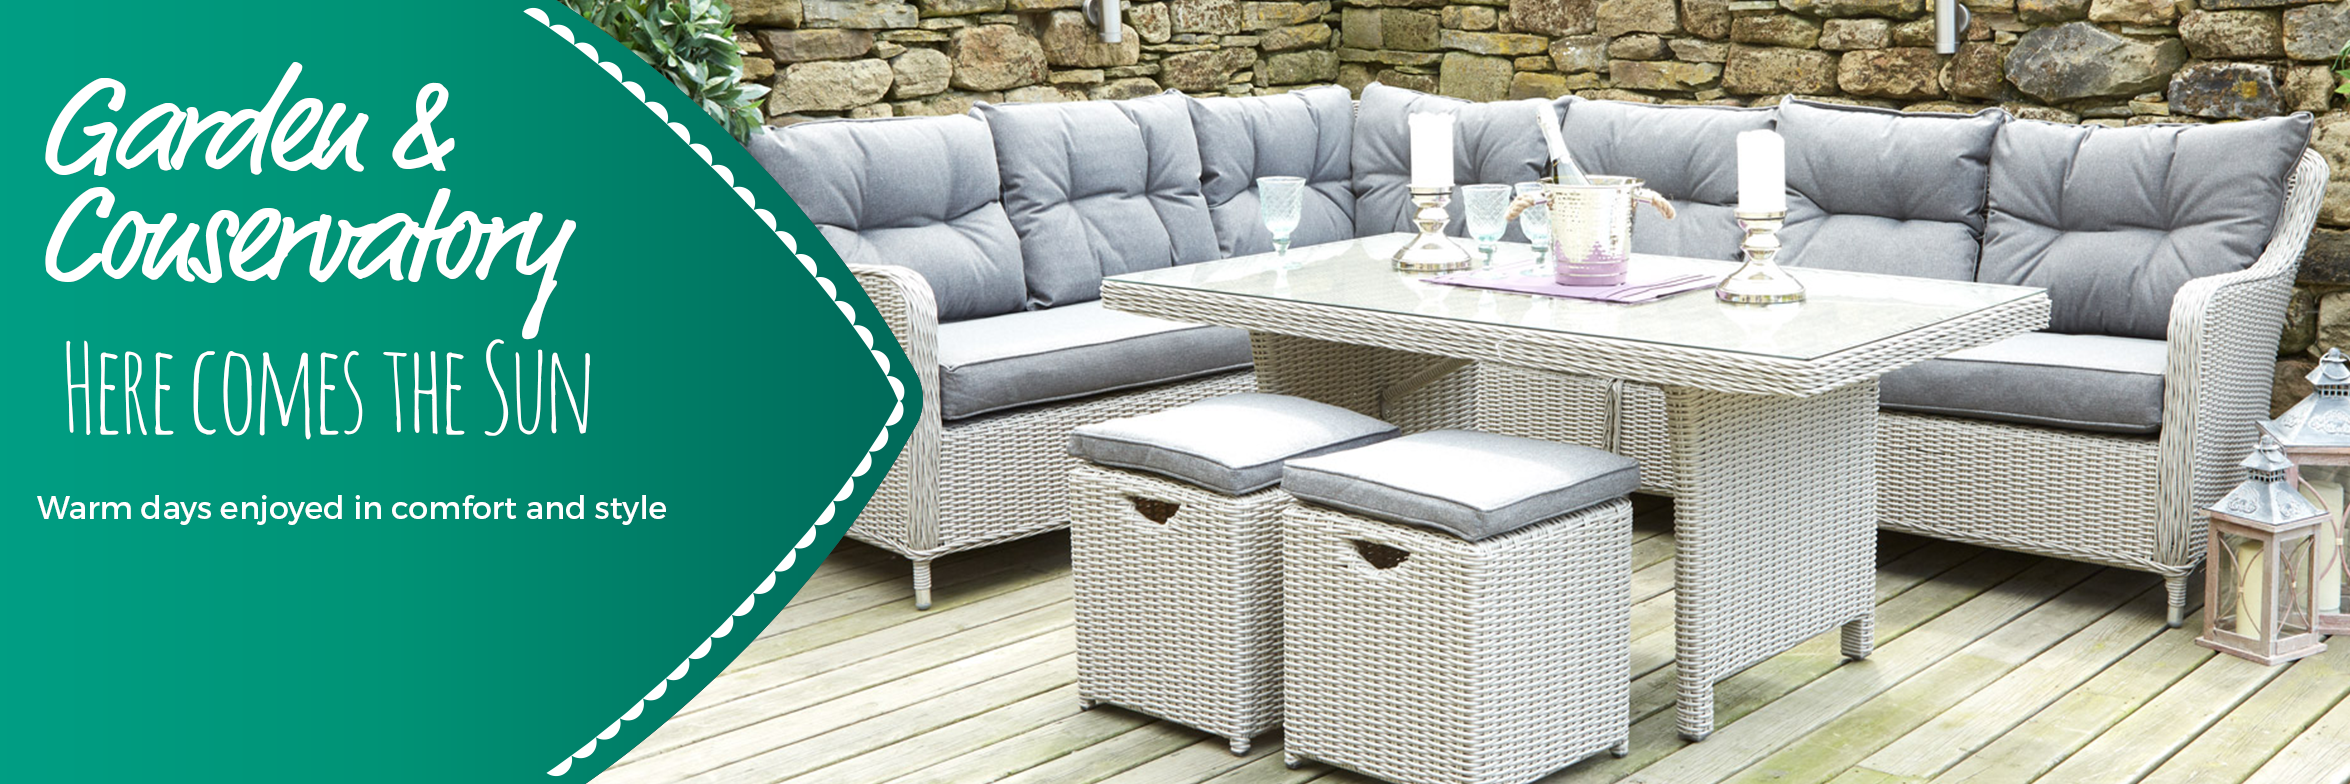 Garden Furniture Rattan Conservatory Patio From Harley Lola